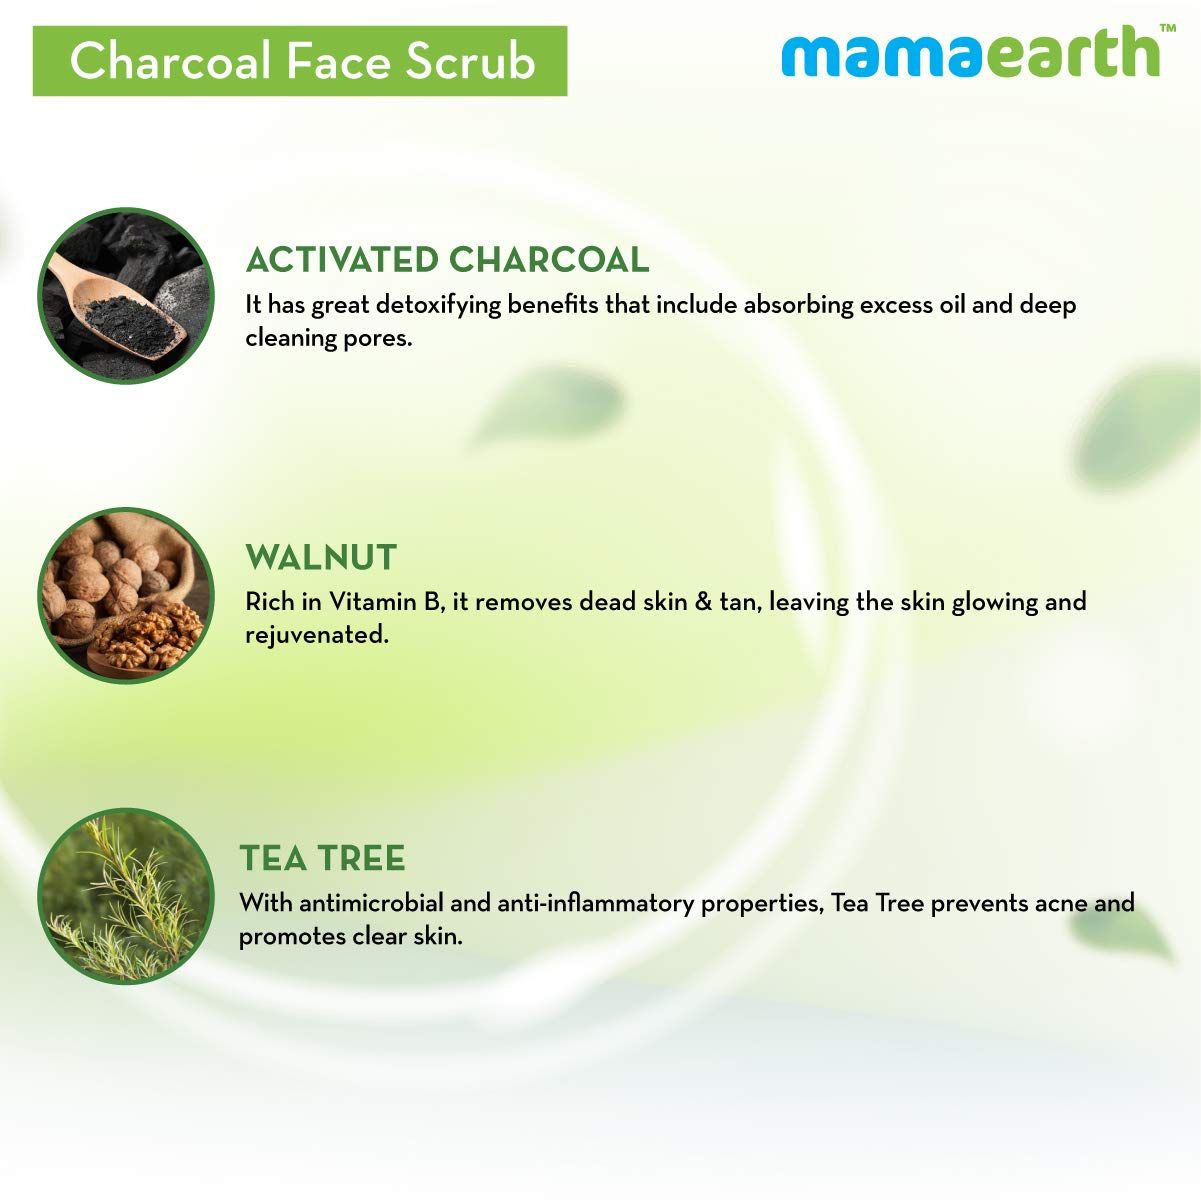 Charcoal Face Scrub For Oily Skin and Normal skin, with Charcoal and Walnut for Deep Exfoliation - 100g